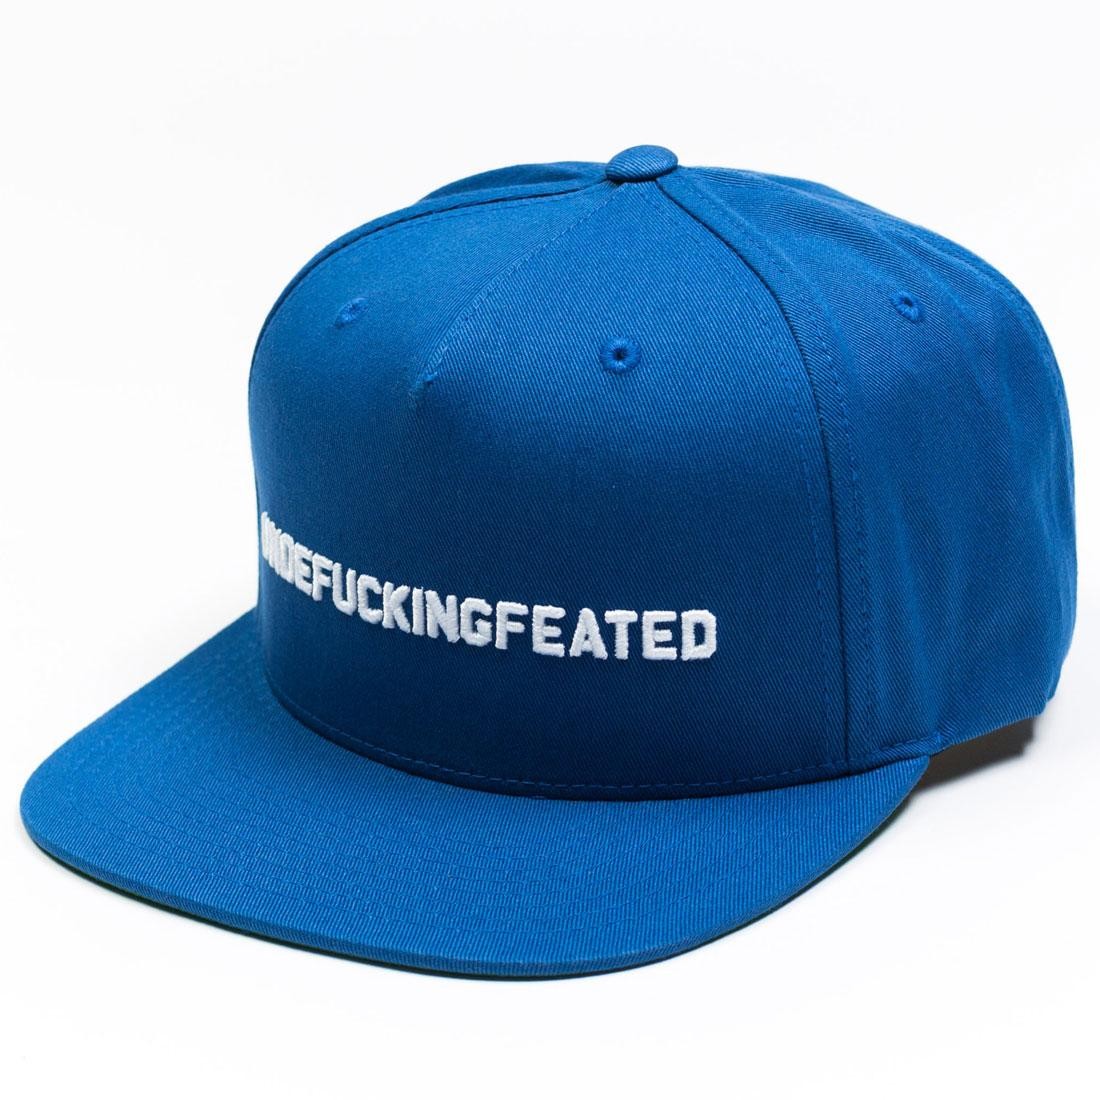 Undefeated UNDEFUCKINGFEATED Cap blue/ darb 